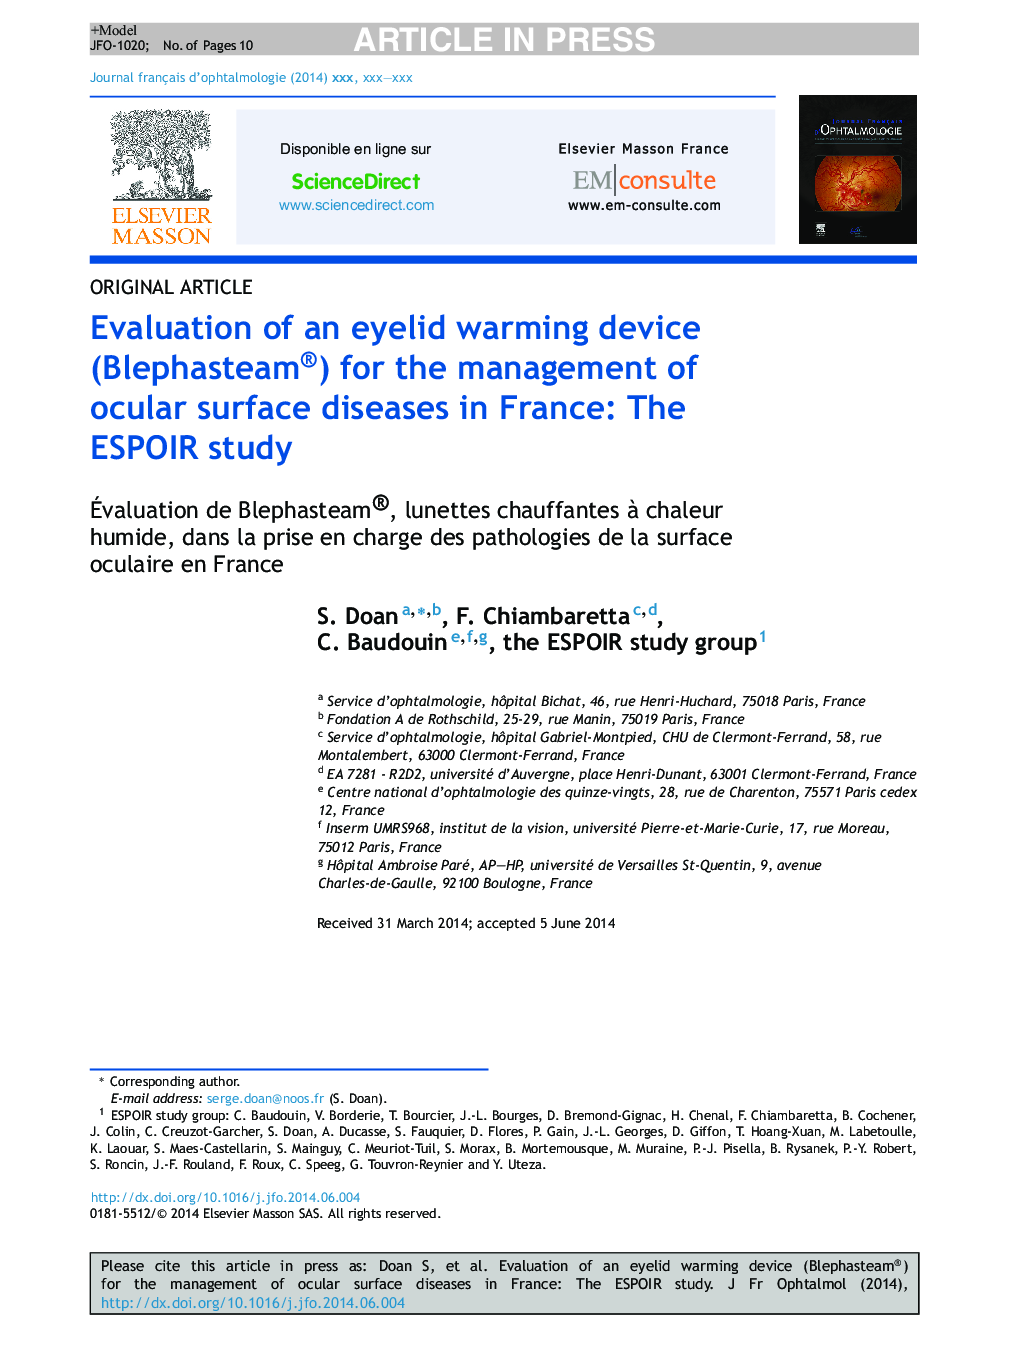 Evaluation of an eyelid warming device (Blephasteam®) for the management of ocular surface diseases in France: The ESPOIR study